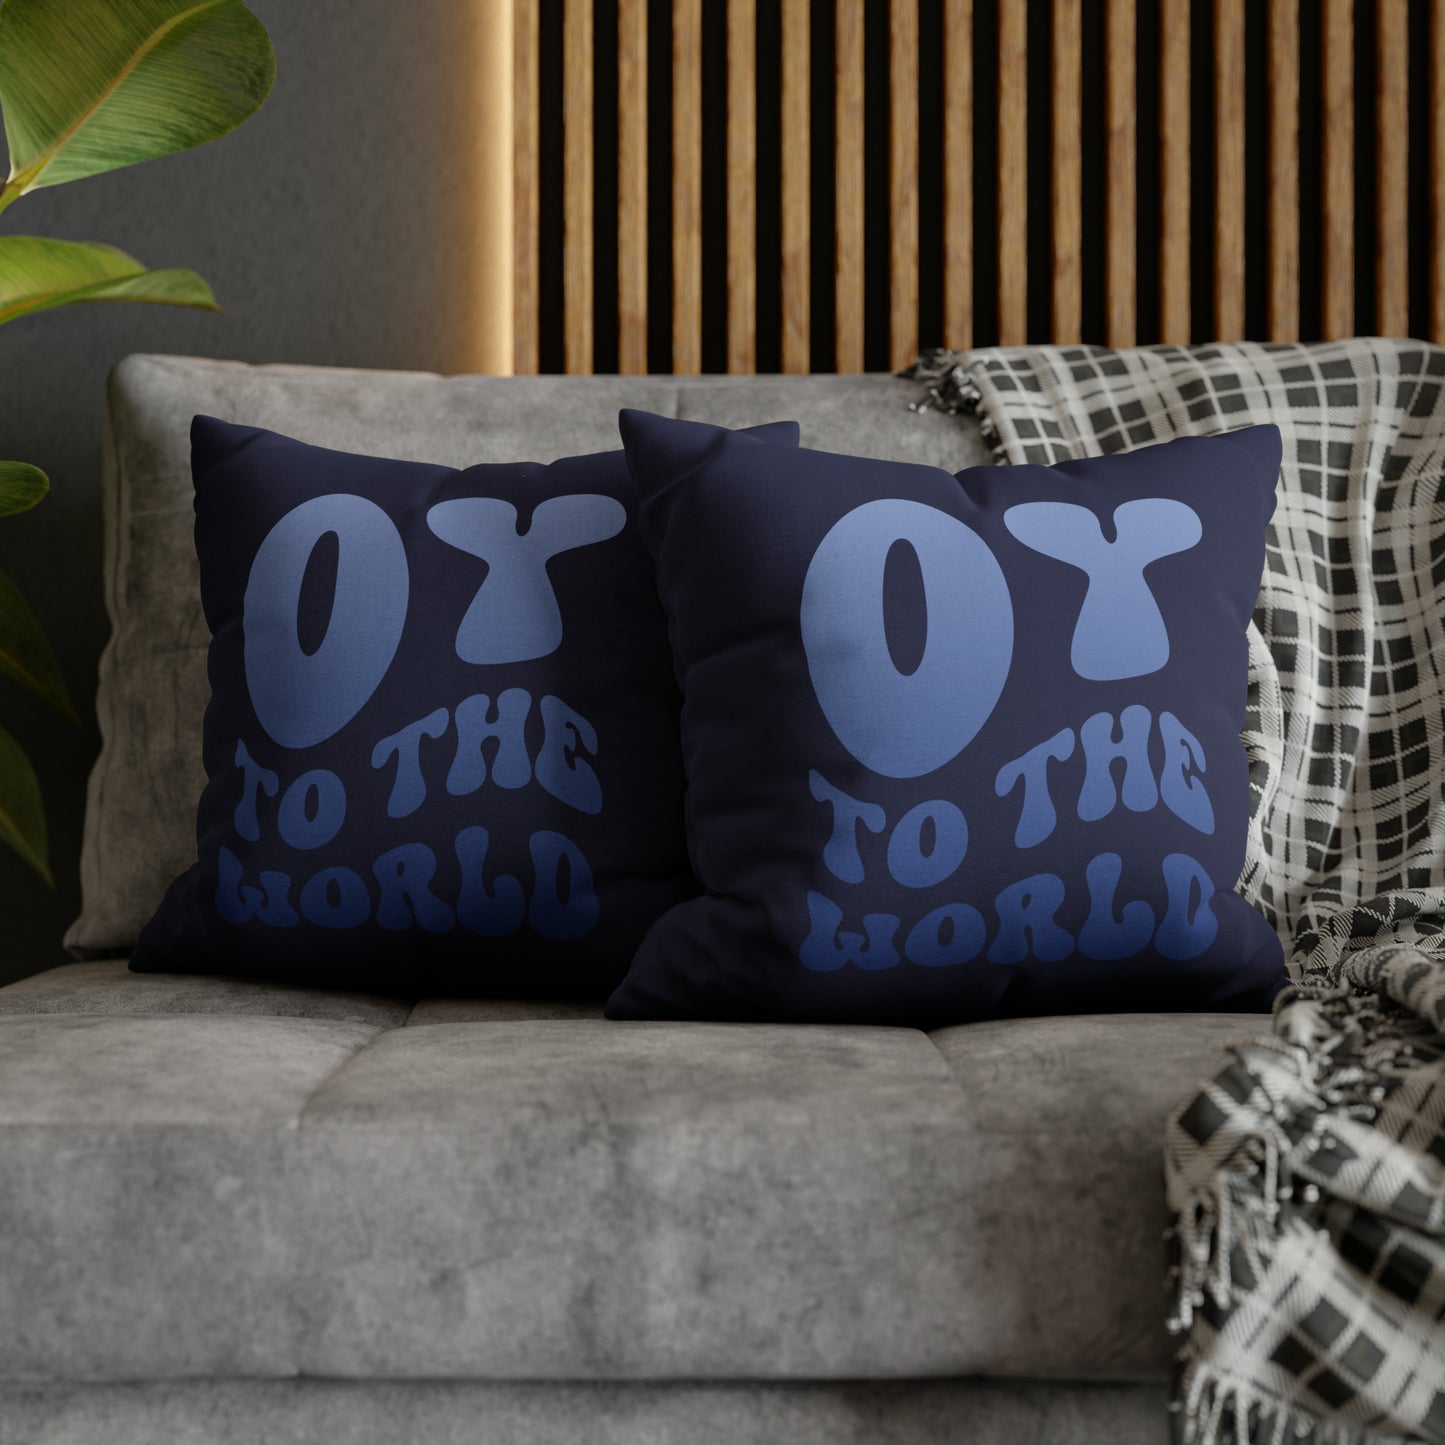 "Oy to the World" Hanukkah Pillow Cover